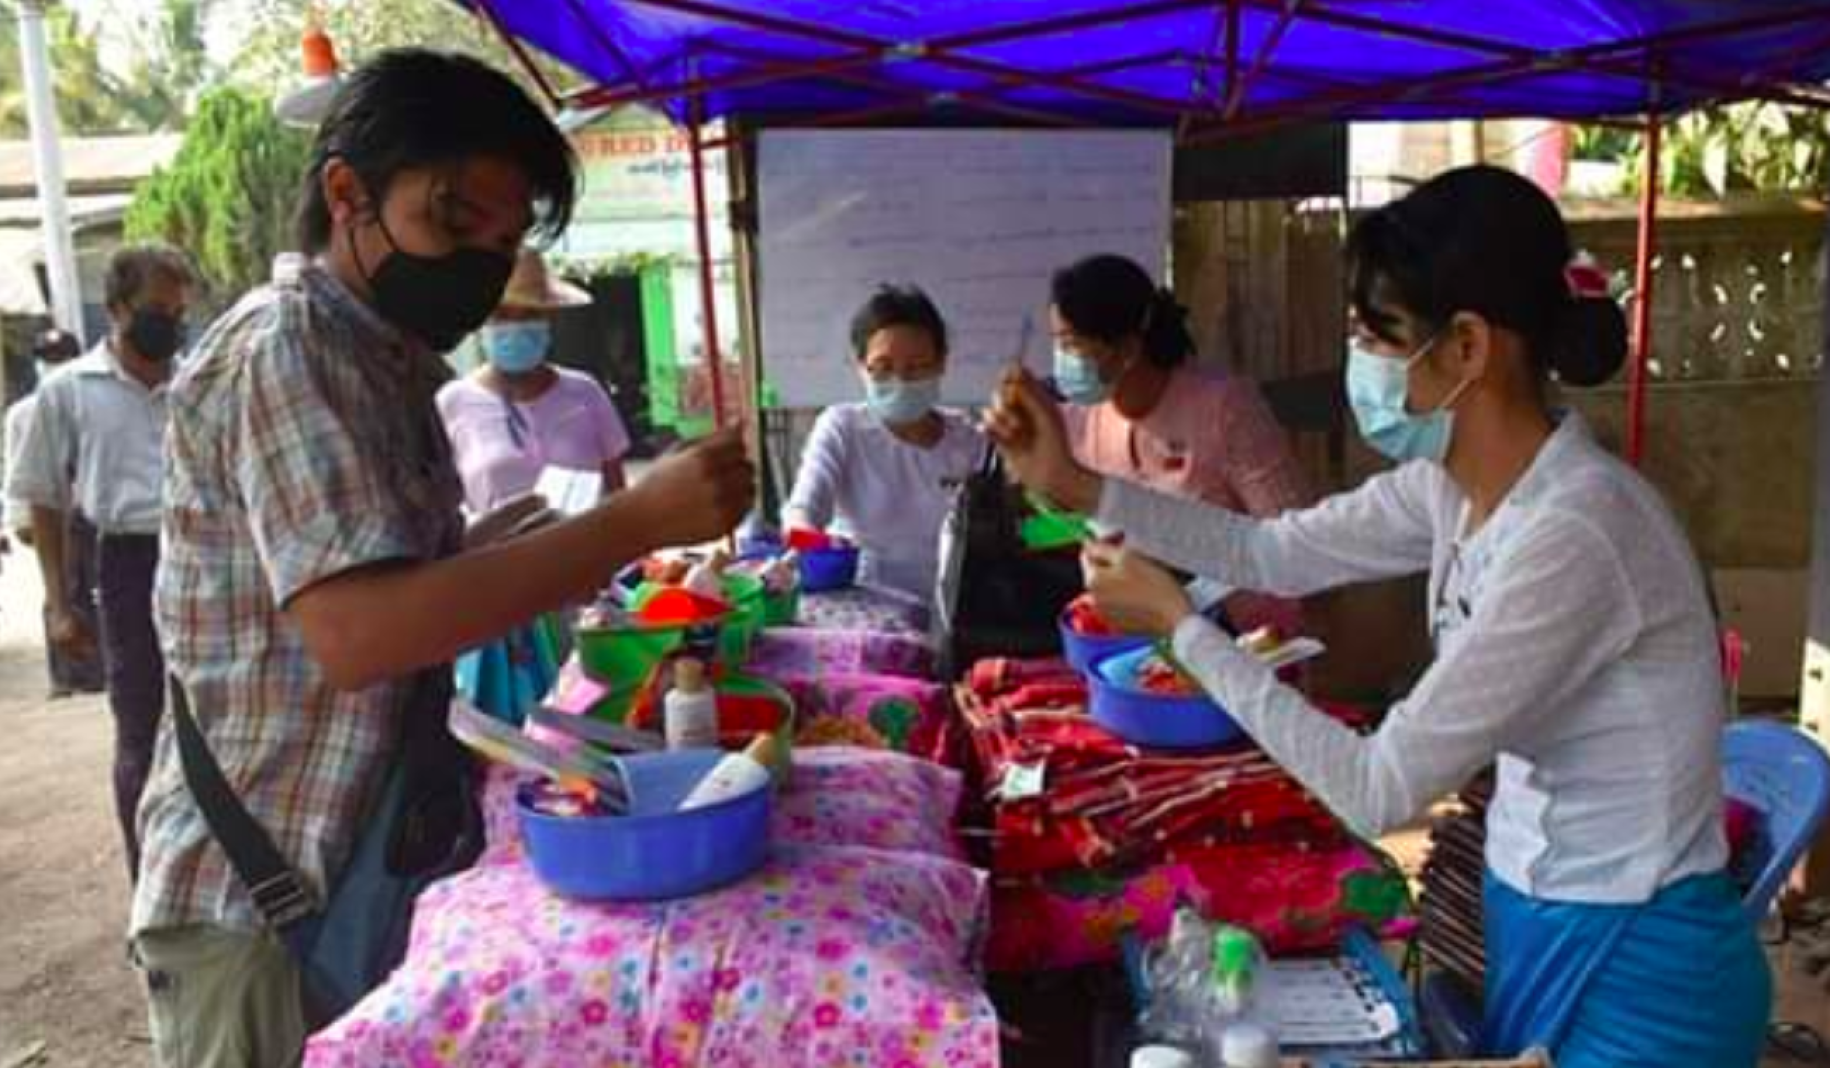 A scene at the quarantine centre in Pyay, where Min Min, a trans man, volunteered.